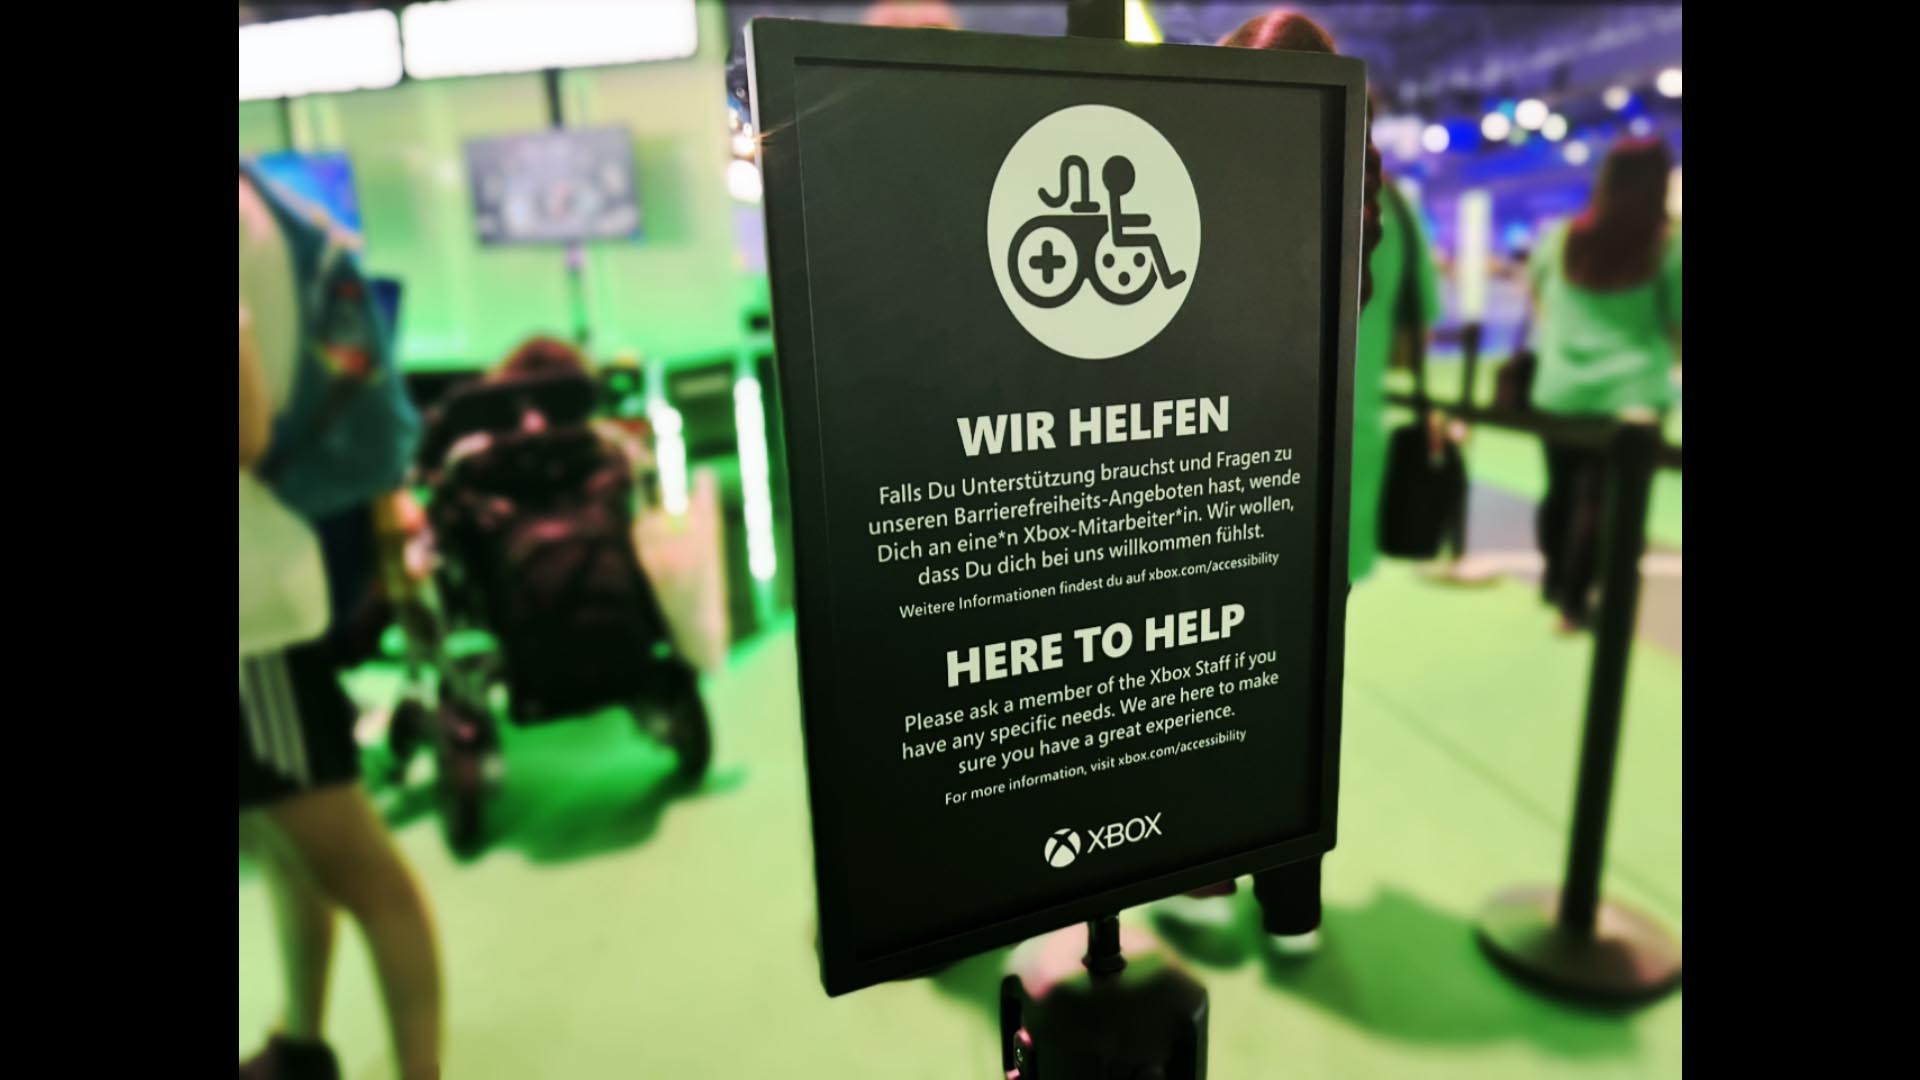 A black sign with a white gaming accessibility logo stands in front of demo stations at a game convention. Text reads in English and German, "Here to help. Please ask a member of the Xbox Staff if you have any specific needs. We are here to make sure you have a great experience. For more information, visit xbox.com/accessibility. Xbox."